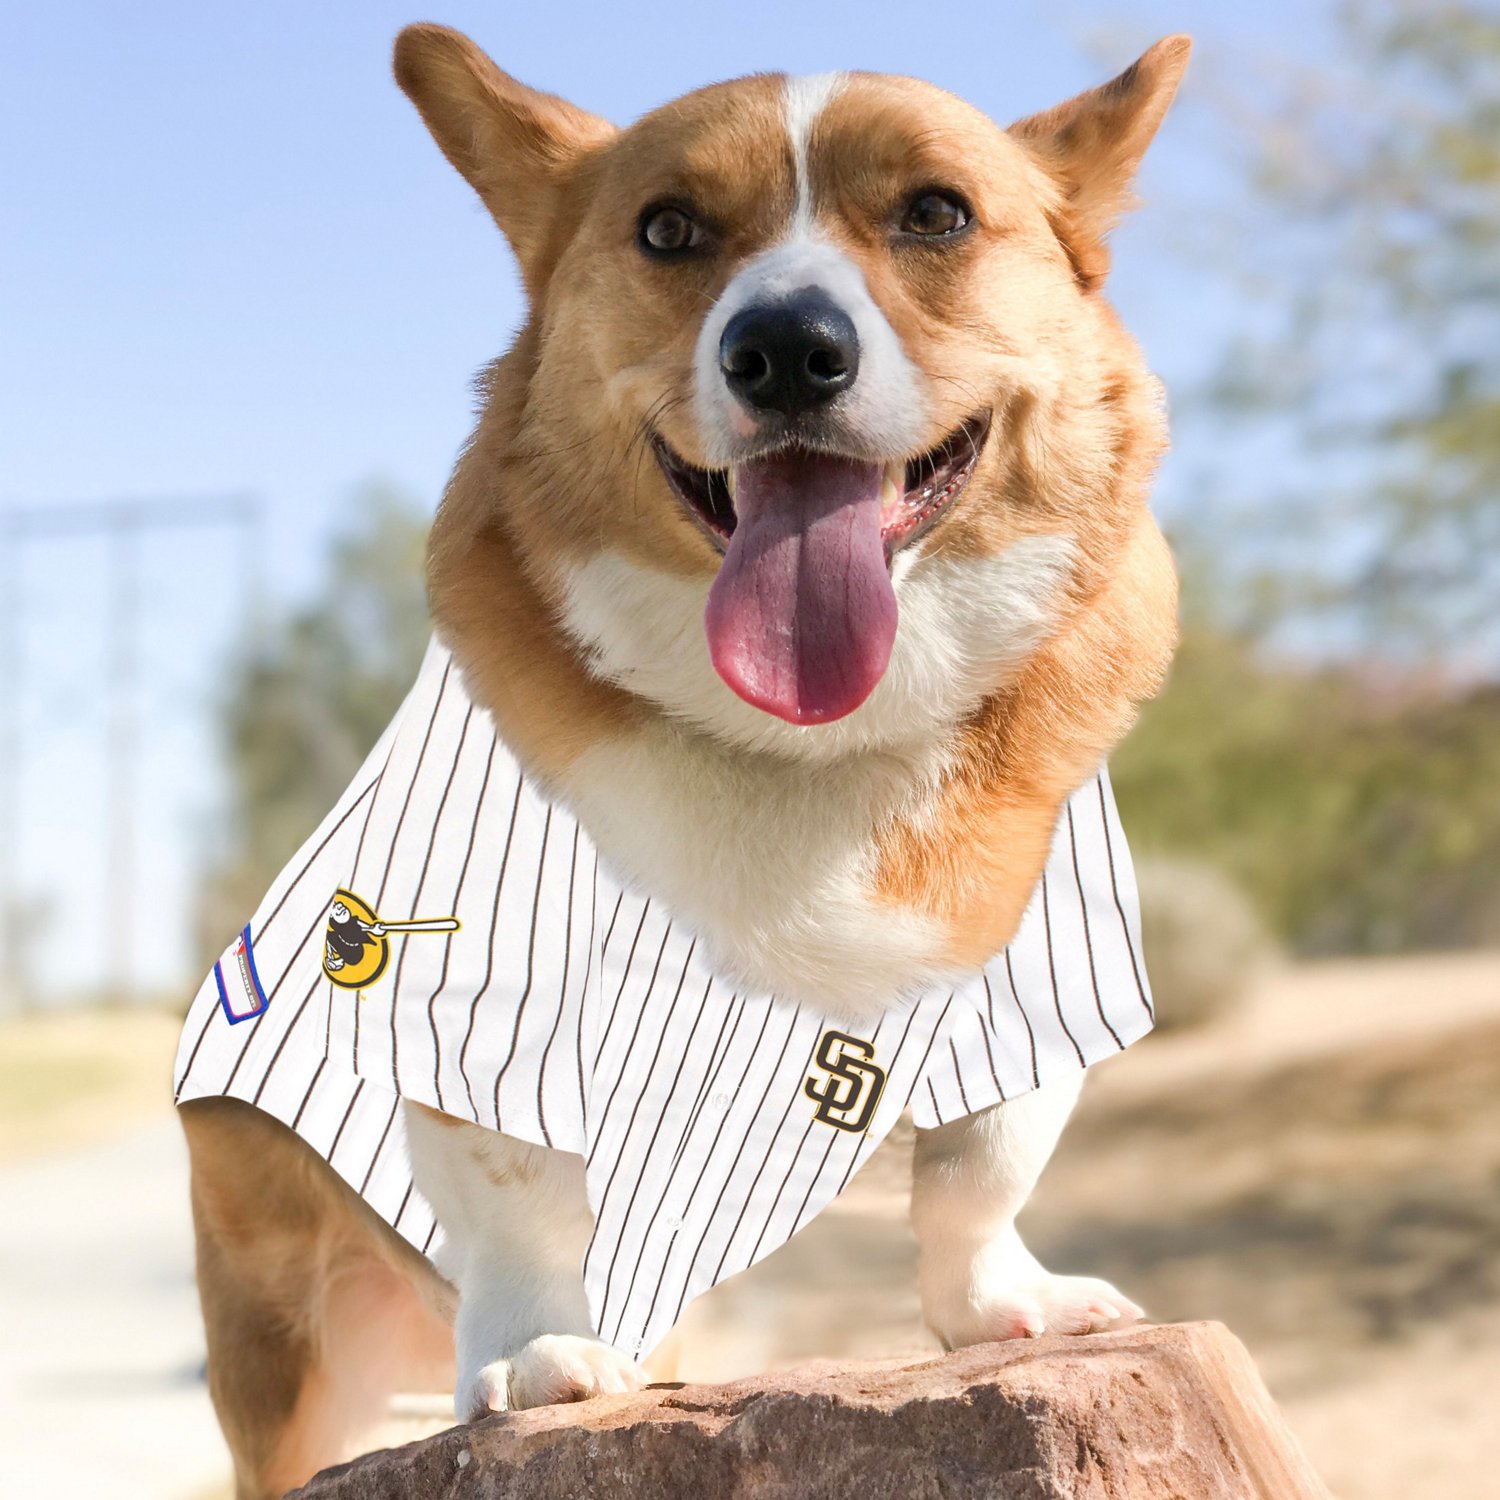  Pets First MLB SAN Diego Padres Reversible T-Shirt, Small for  Dogs & Cats. A Pet Shirt with The Team Logo That Comes with 2 Designs;  Stripe Tee Shirt on one